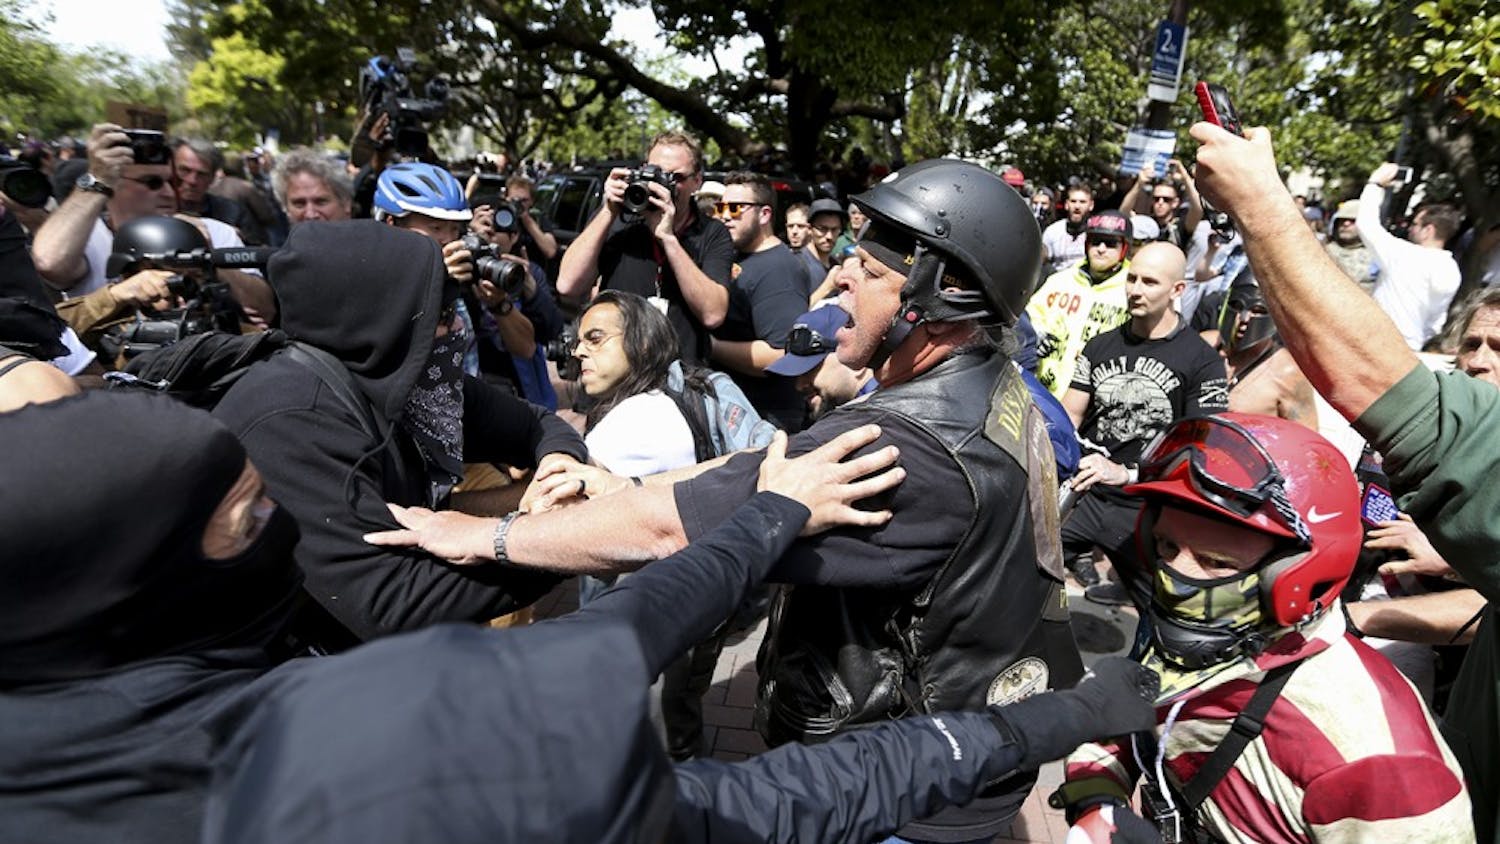 Anti- and pro-Trump supporters clash during competing demonstrations at Martin Luther King Jr. Civic Center Park in Berkeley, Calif., on Saturday, April 15, 2017. (Anda Chu/Bay Area News Group/TNS)